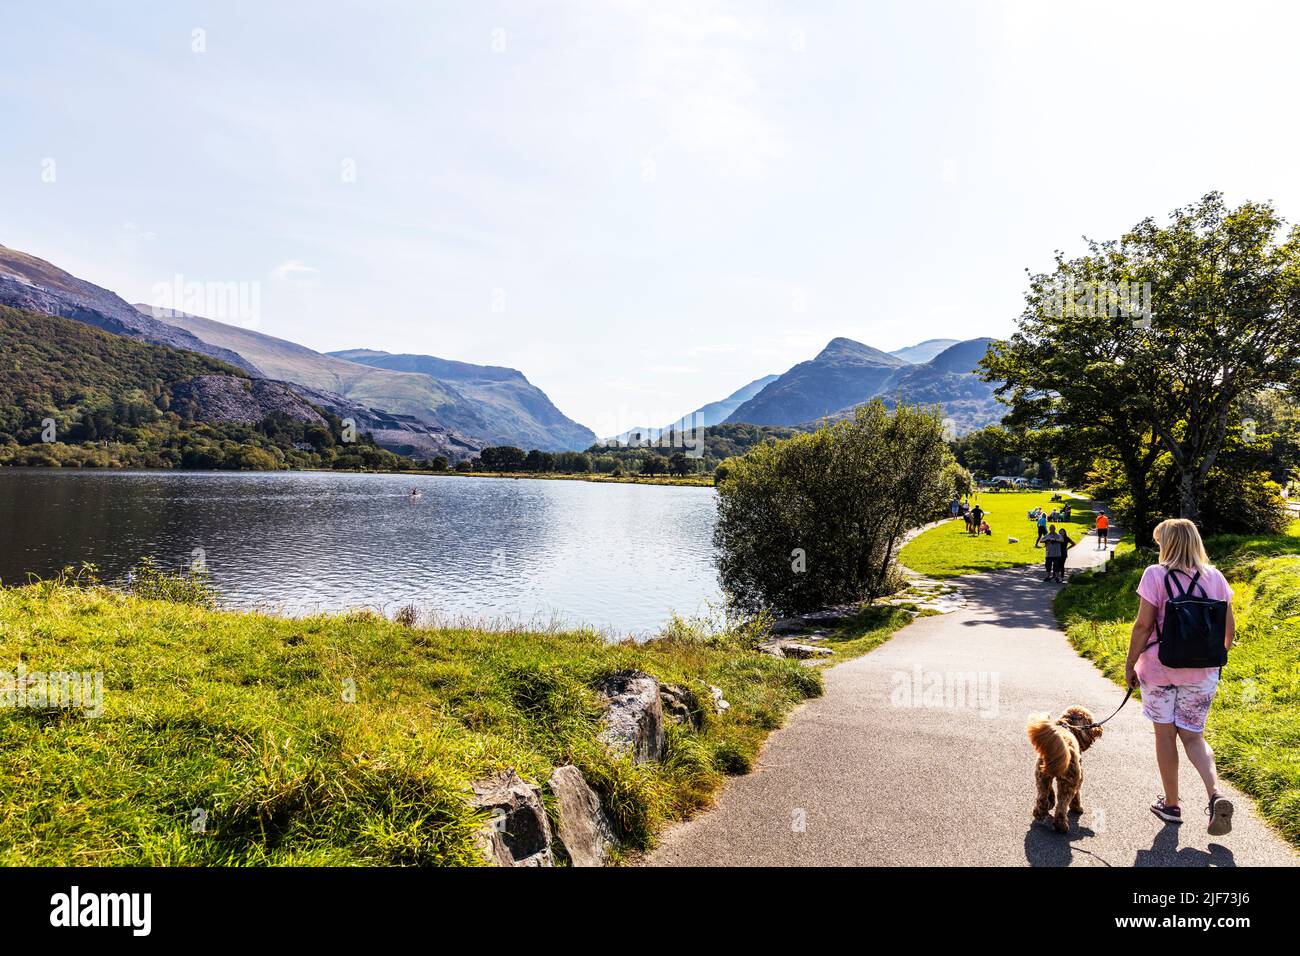 Llanberis in the Snowdonia National Park, northern shore of Llyn Padarn in north Wales in the Snowdonia National Park, Llyn Padarn, lake, Llanberis Stock Photo